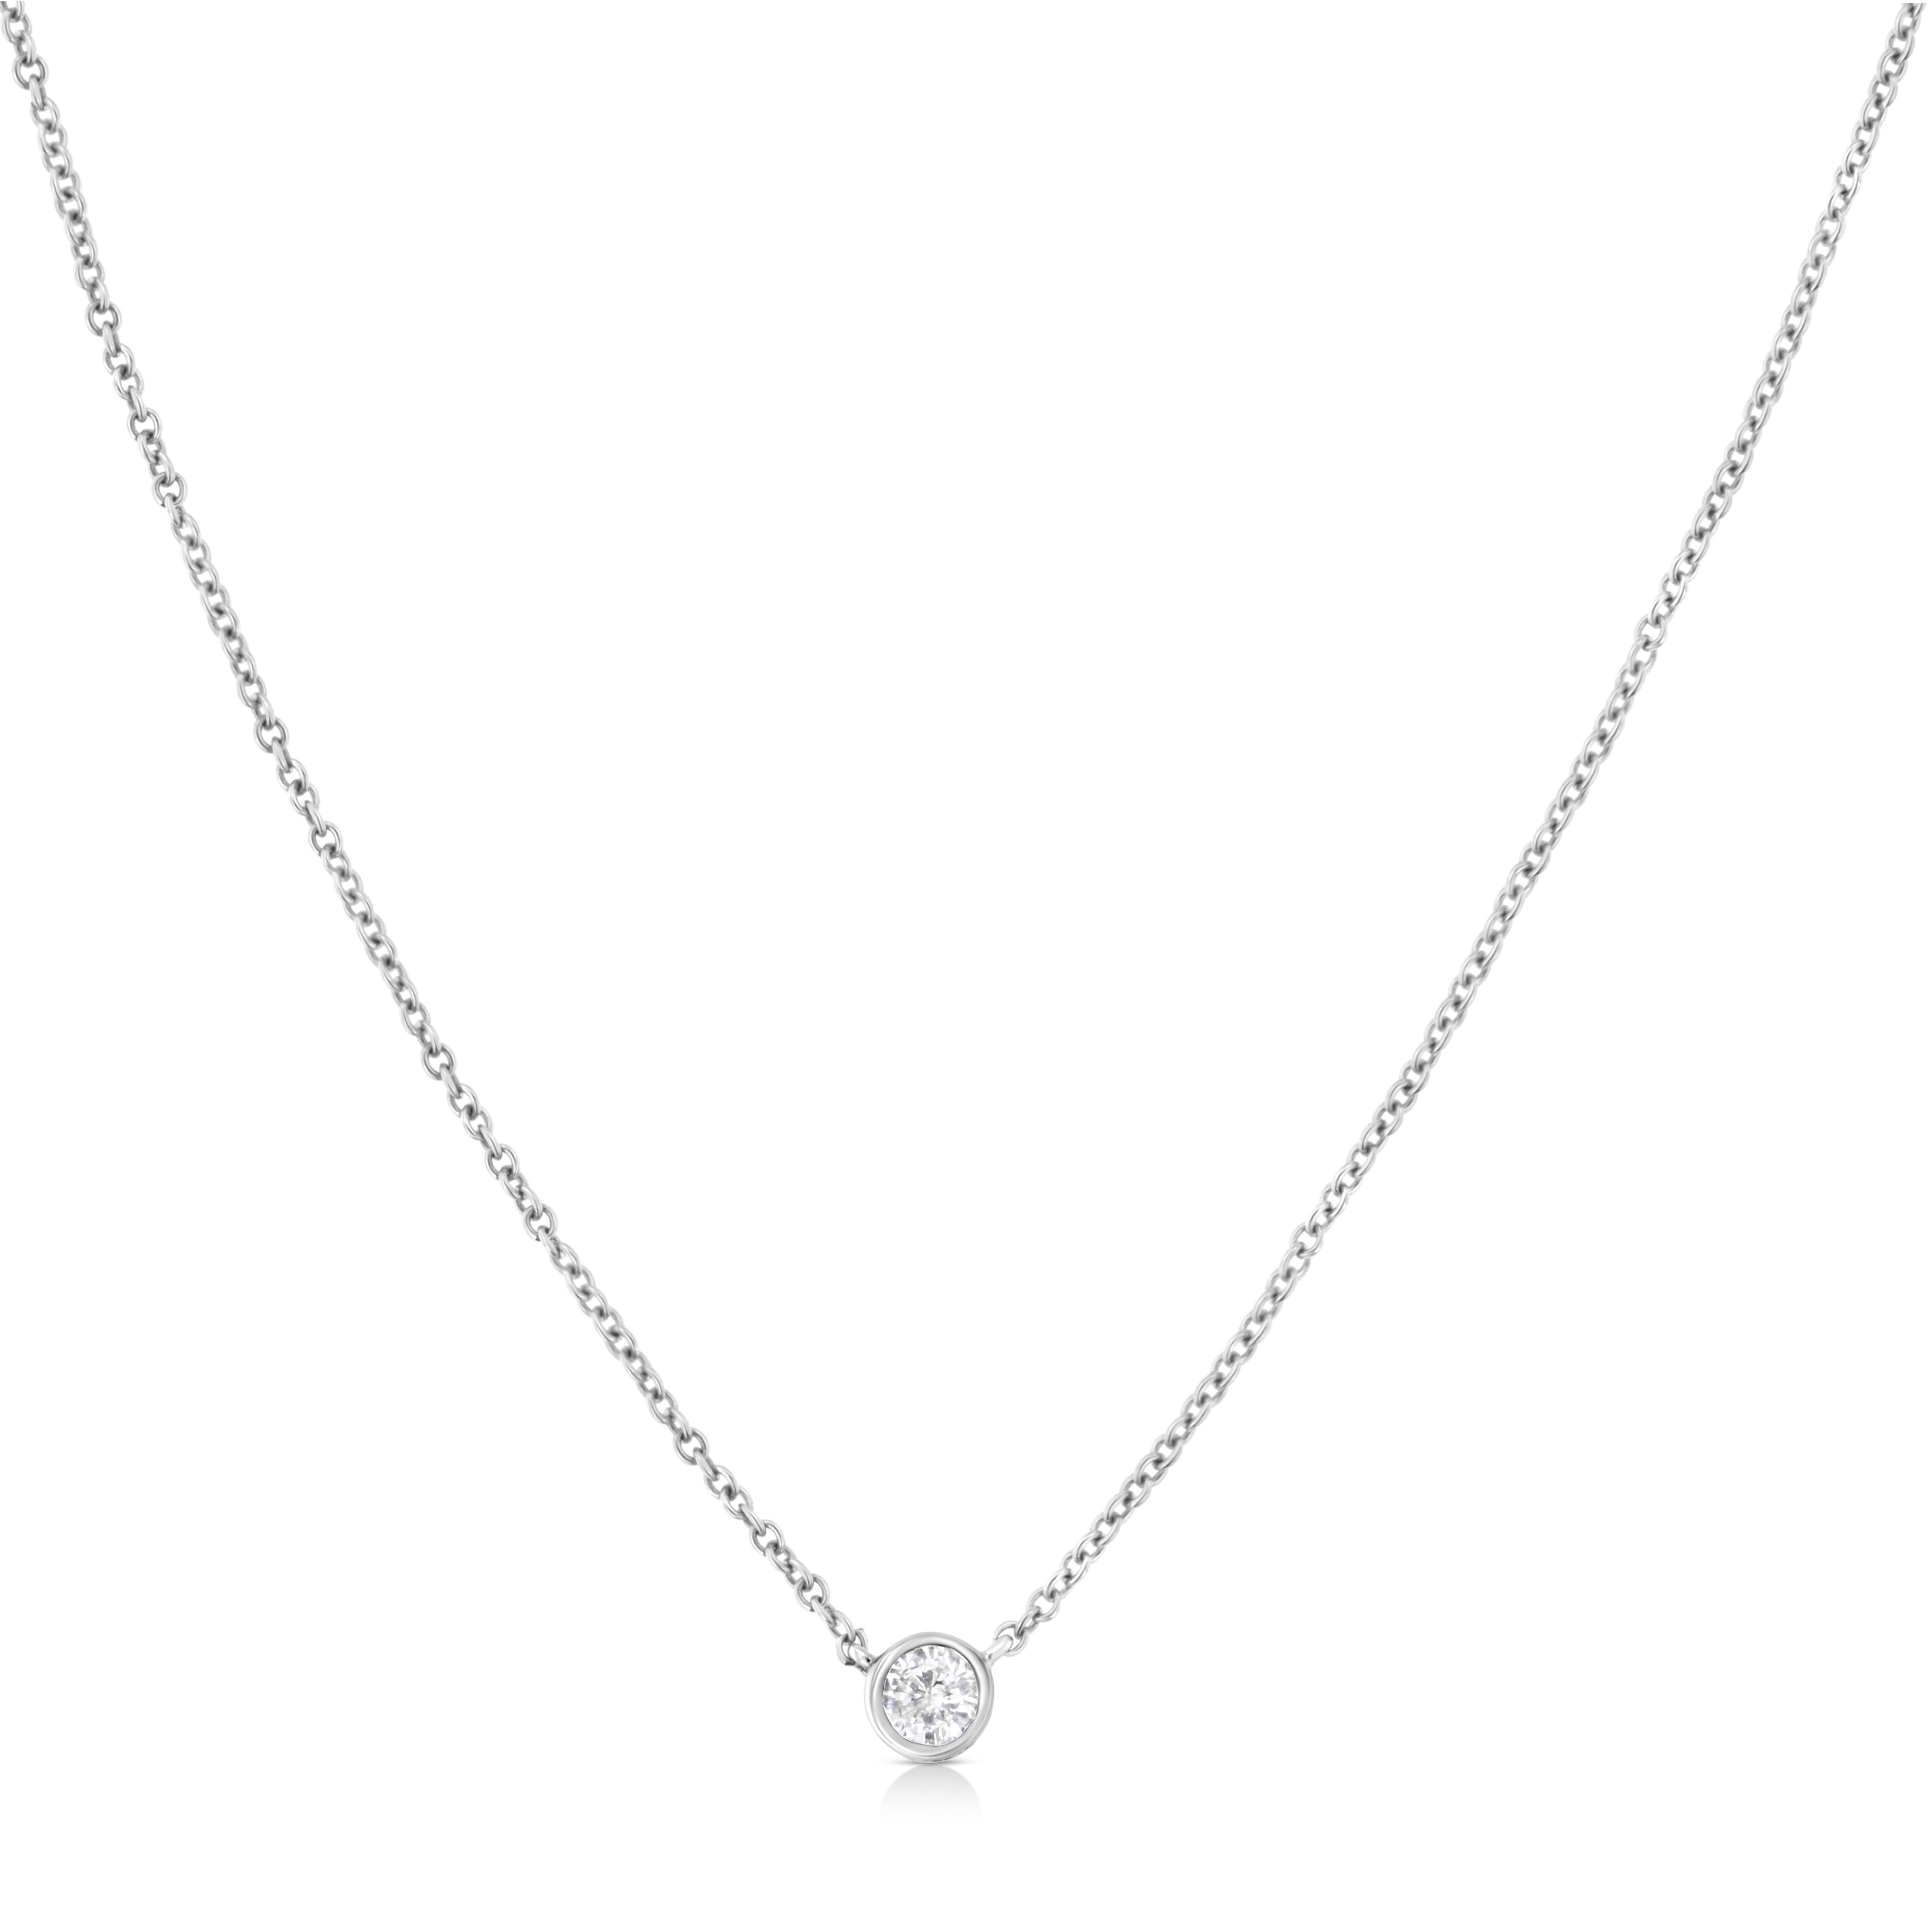 Some things shouldn't be reinvented, which is why we created the Solitaire Diamond Necklace. This is the perfect way to highlight every big occasion, transition, and personal achievement in your life. This Solitaire Diamond Necklace features a